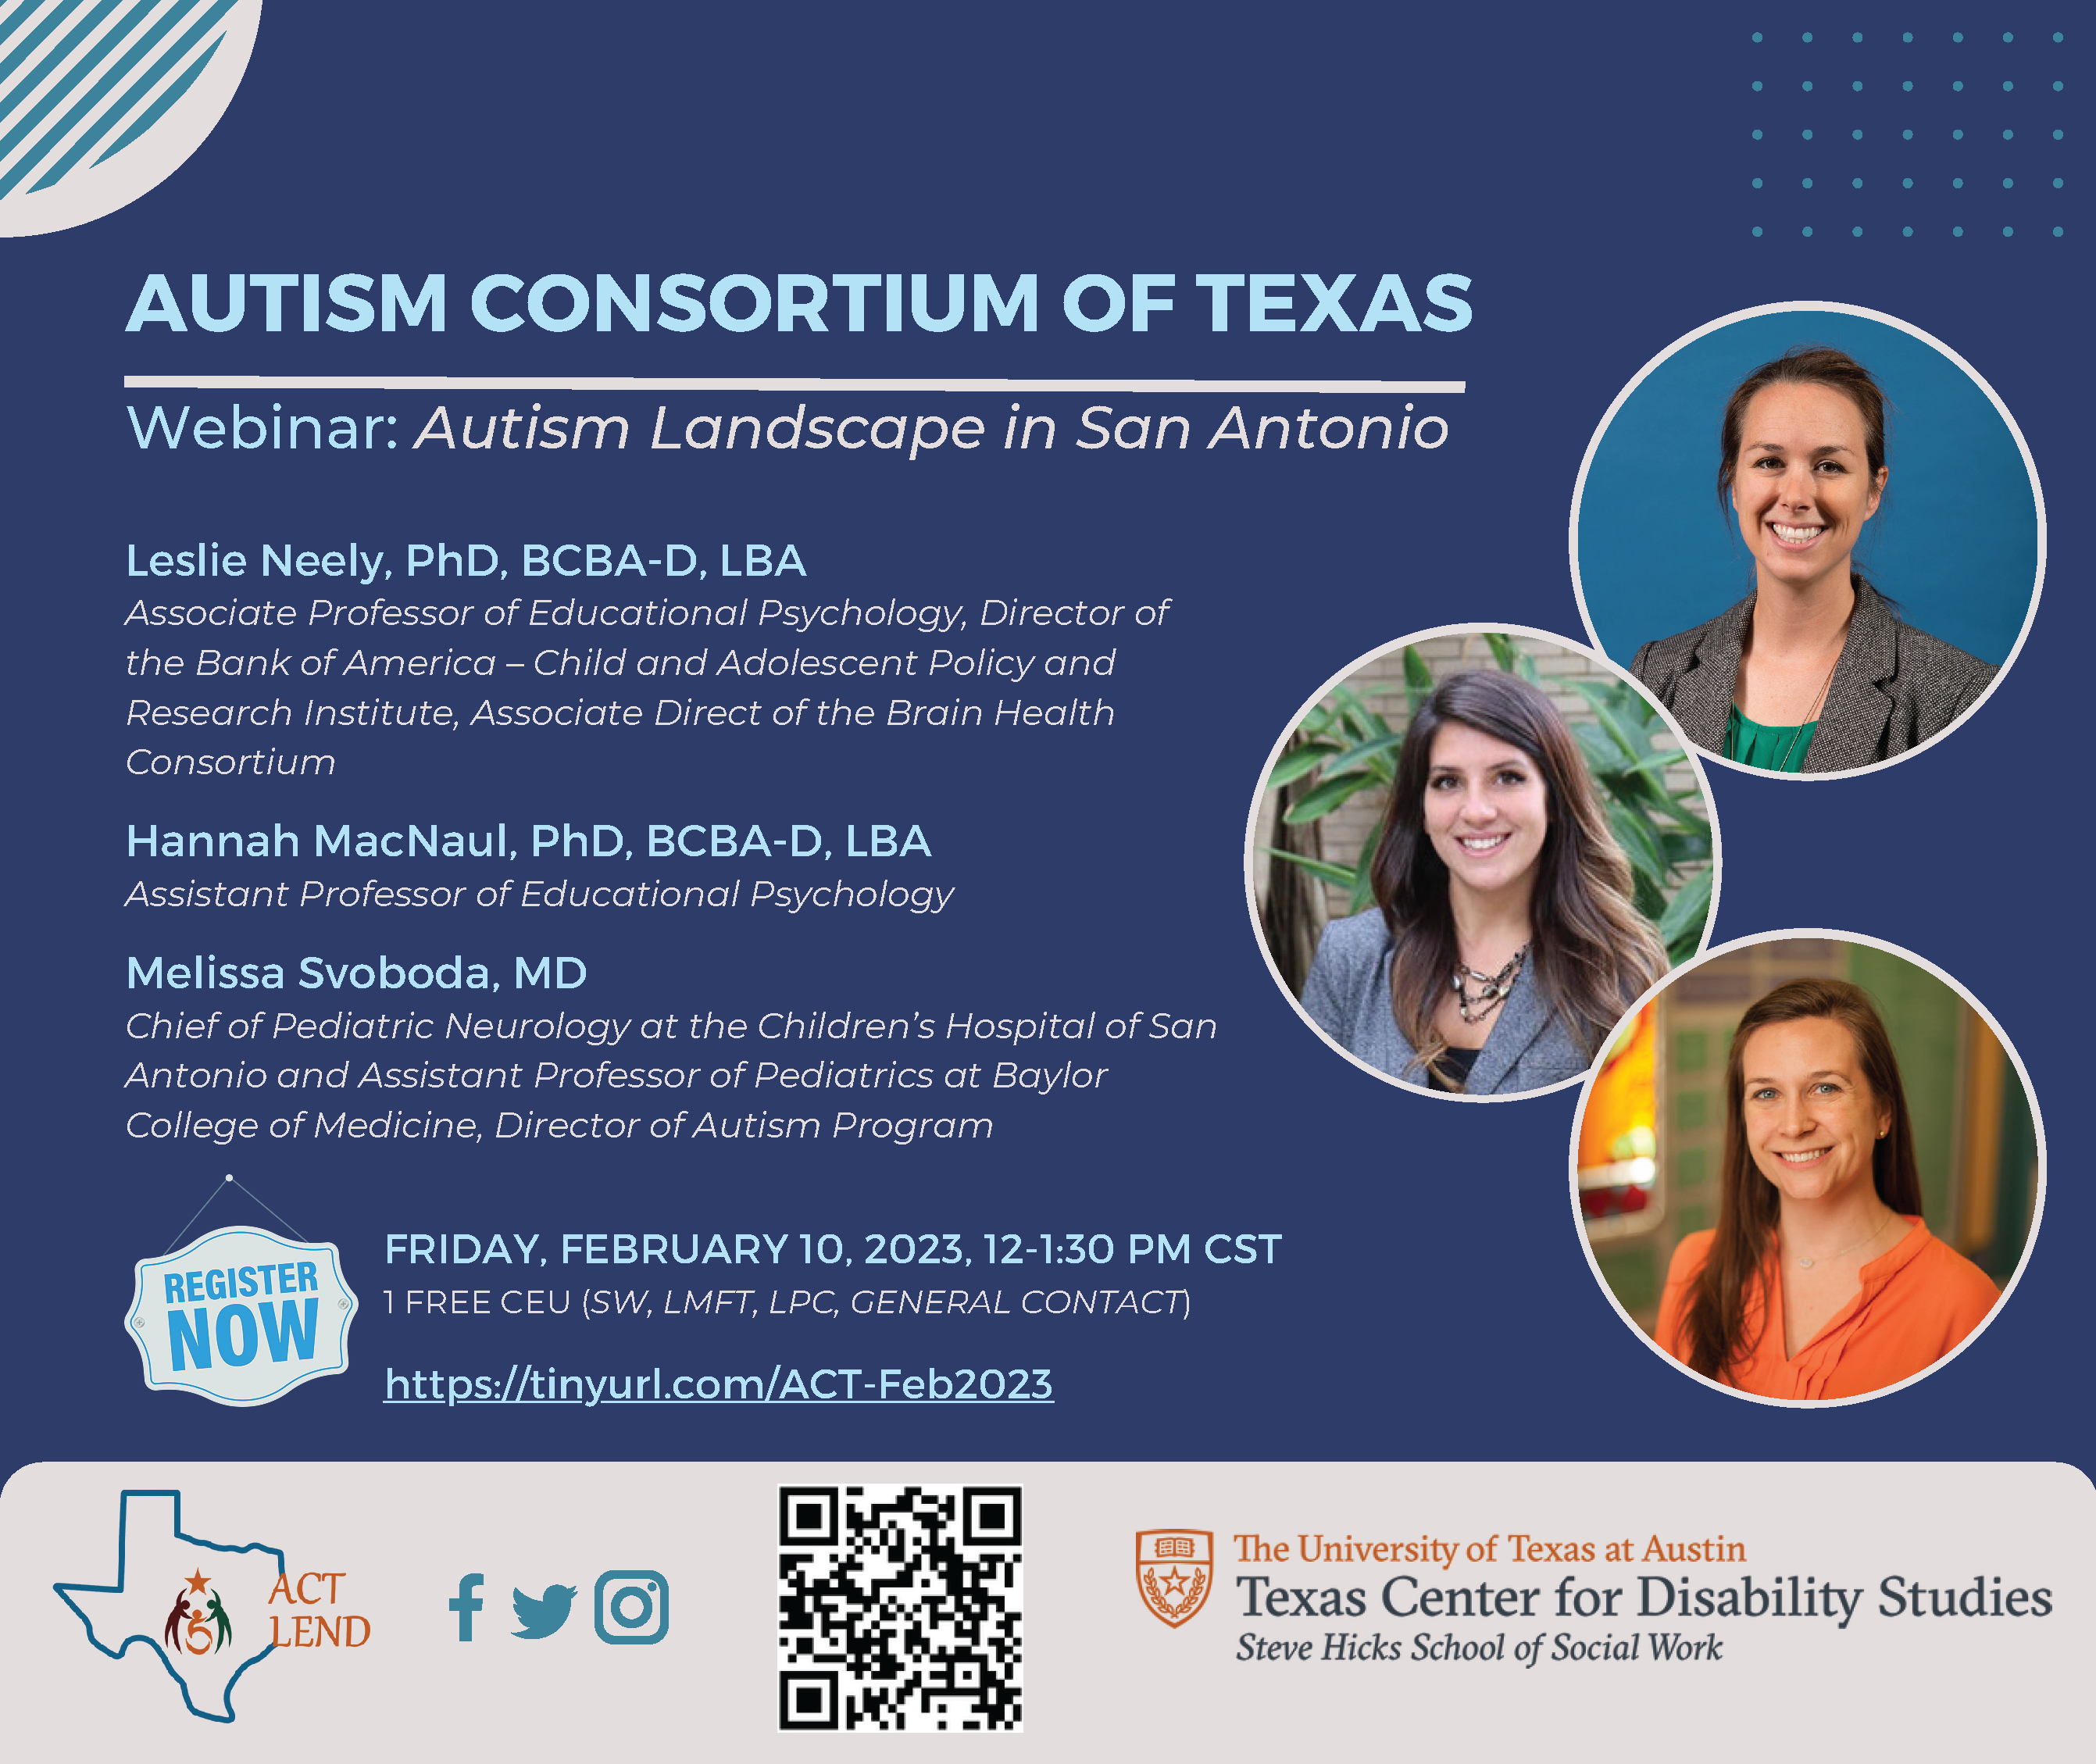 Autism Consrtium of Texas February Webinar on the Autism Landscape in San Antonio to take place on Friday, February 10, 2023, from 12-1:30PM CST